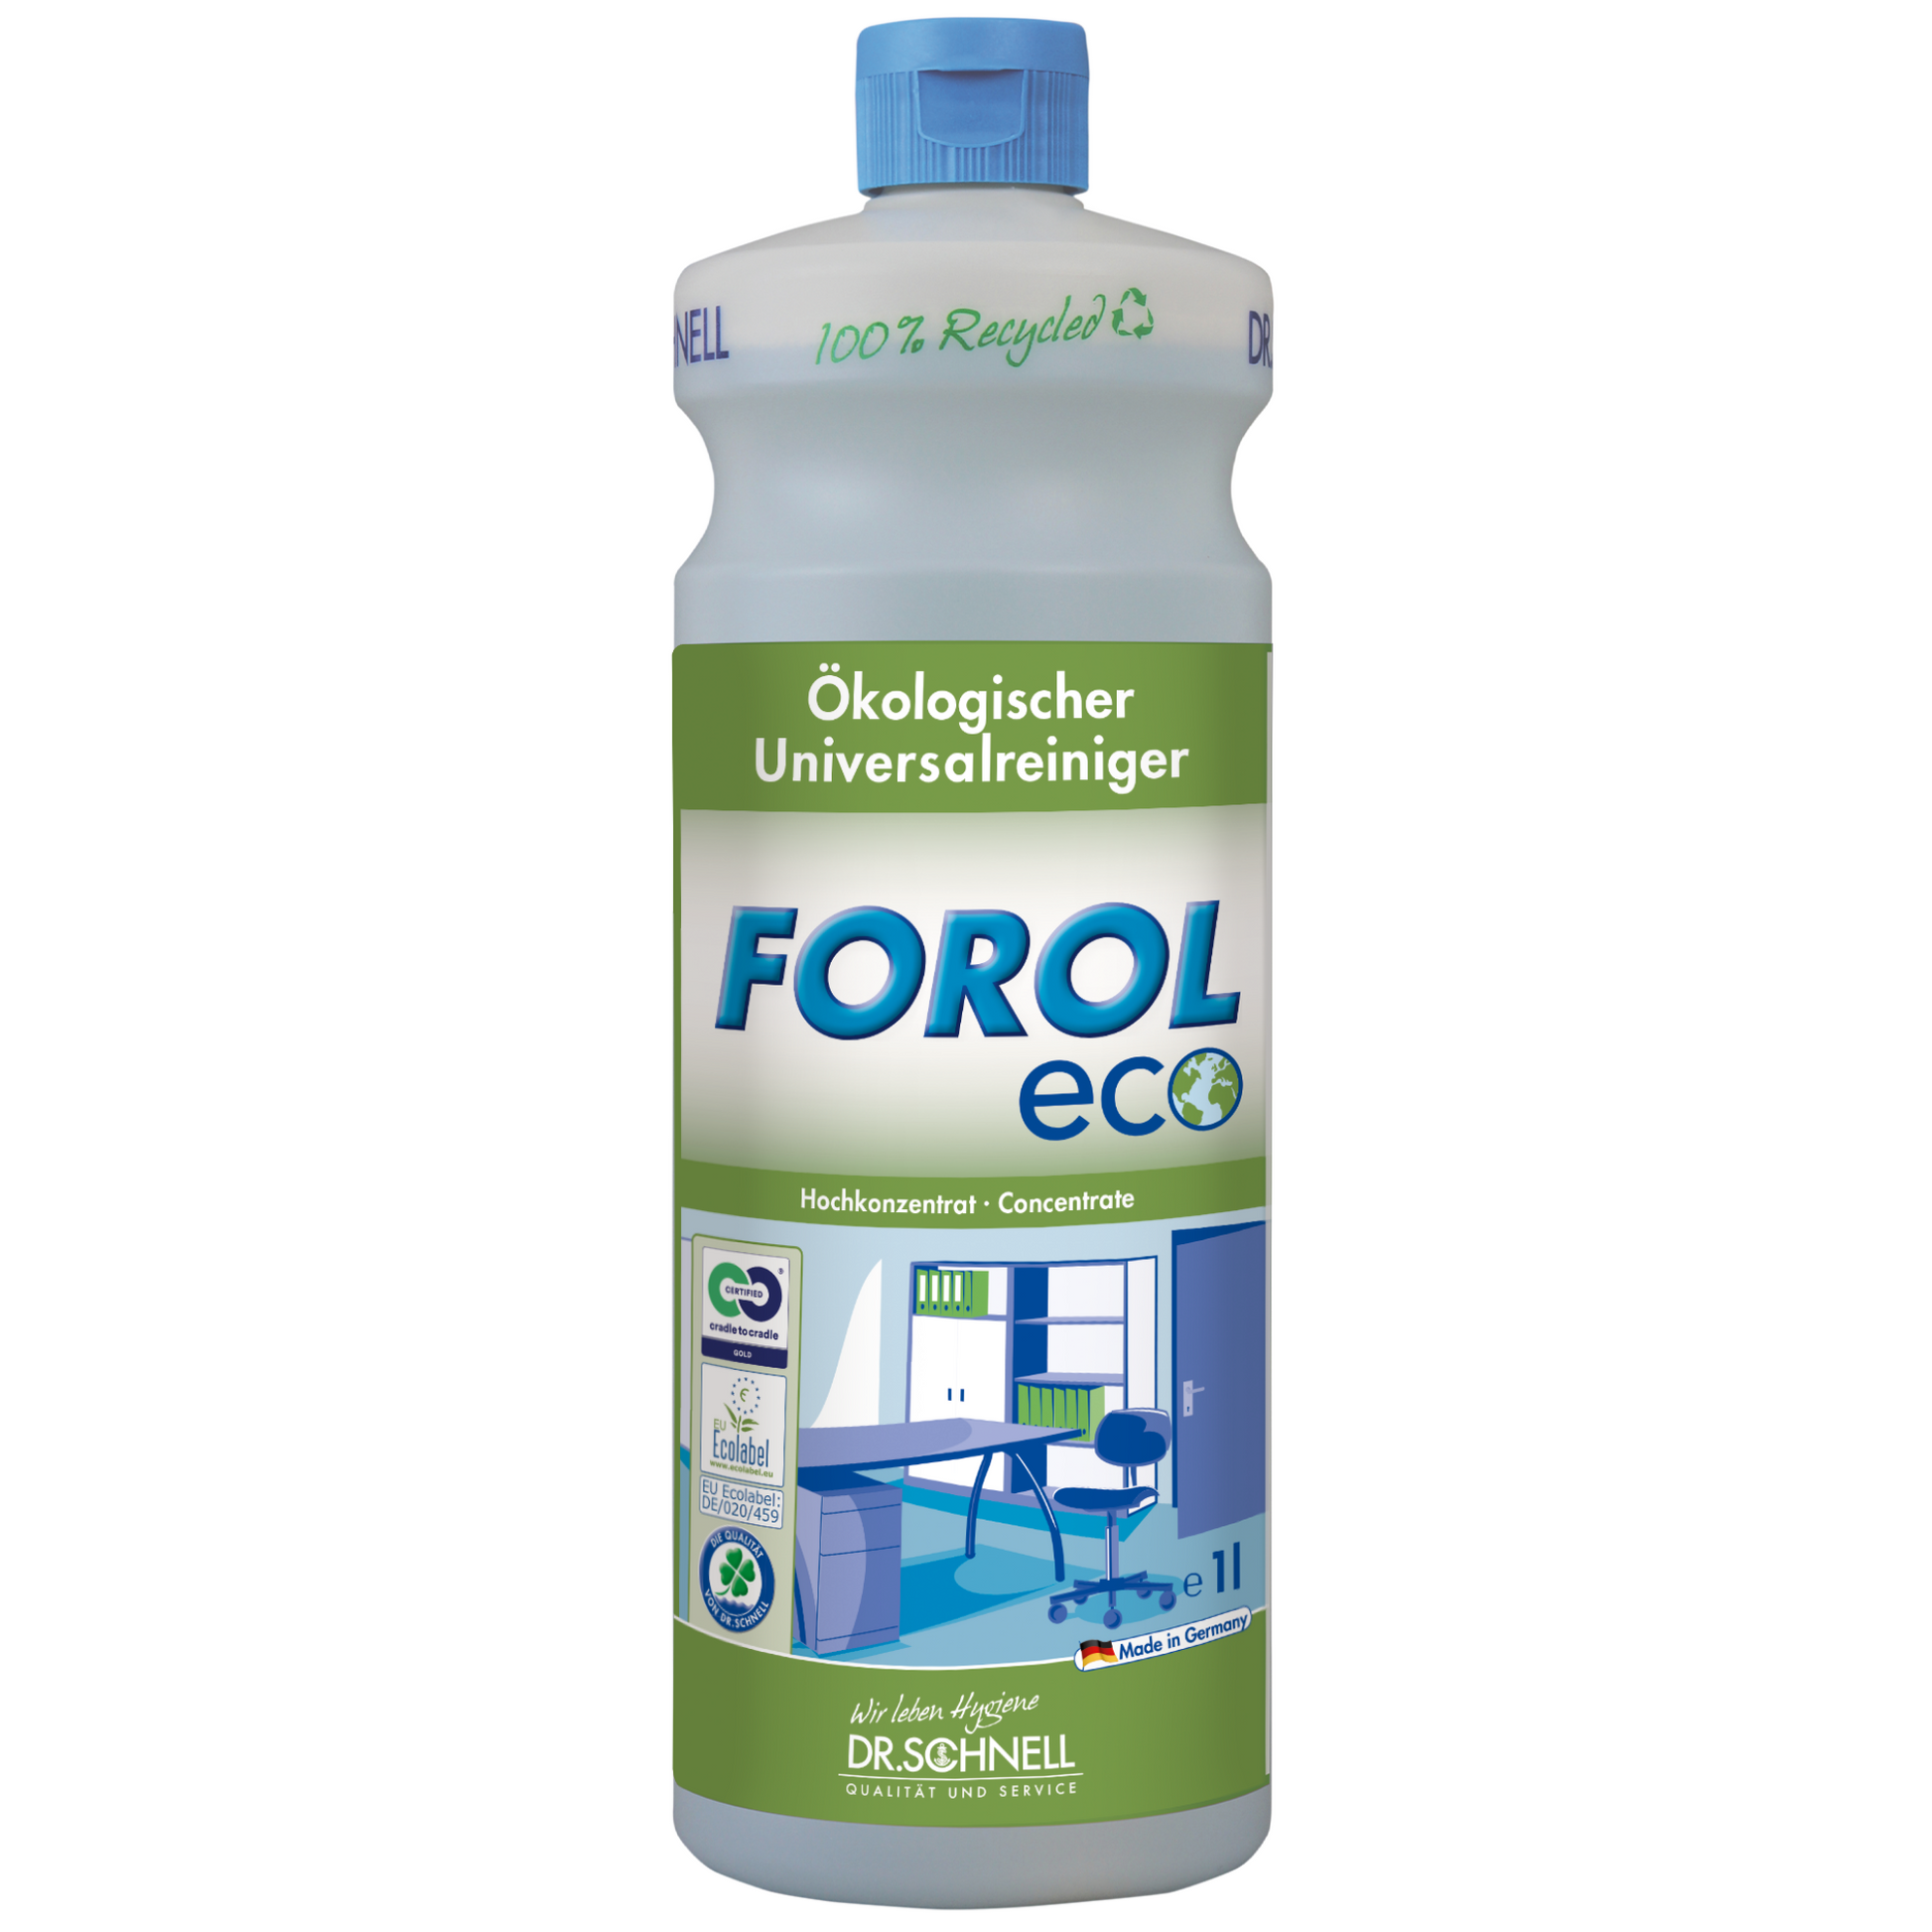 Dr. Schnell Forol ECO ecological universal cleaner 1 liter